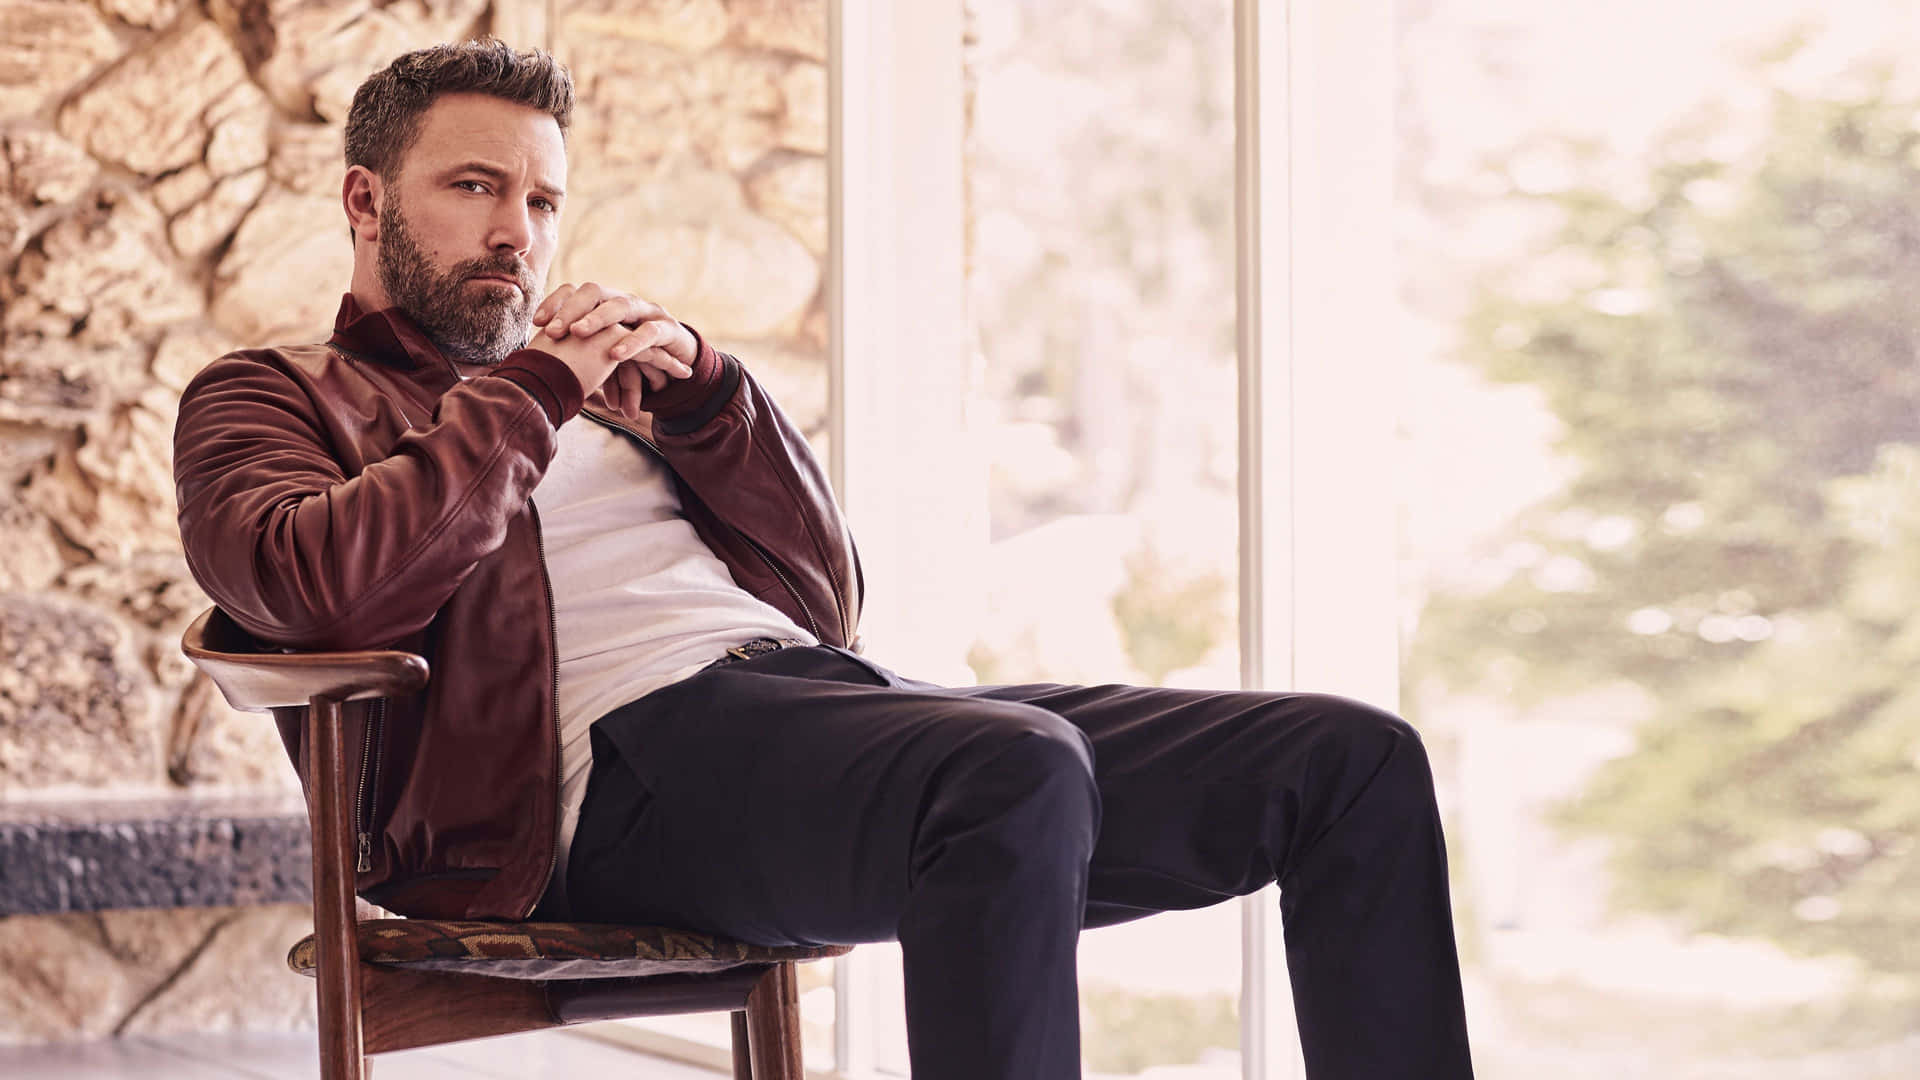 Benaffleck Is An American Actor, Film Director, Producer, And Screenwriter. He Has Received Multiple Awards, Including Two Academy Awards And Three Golden Globe Awards.